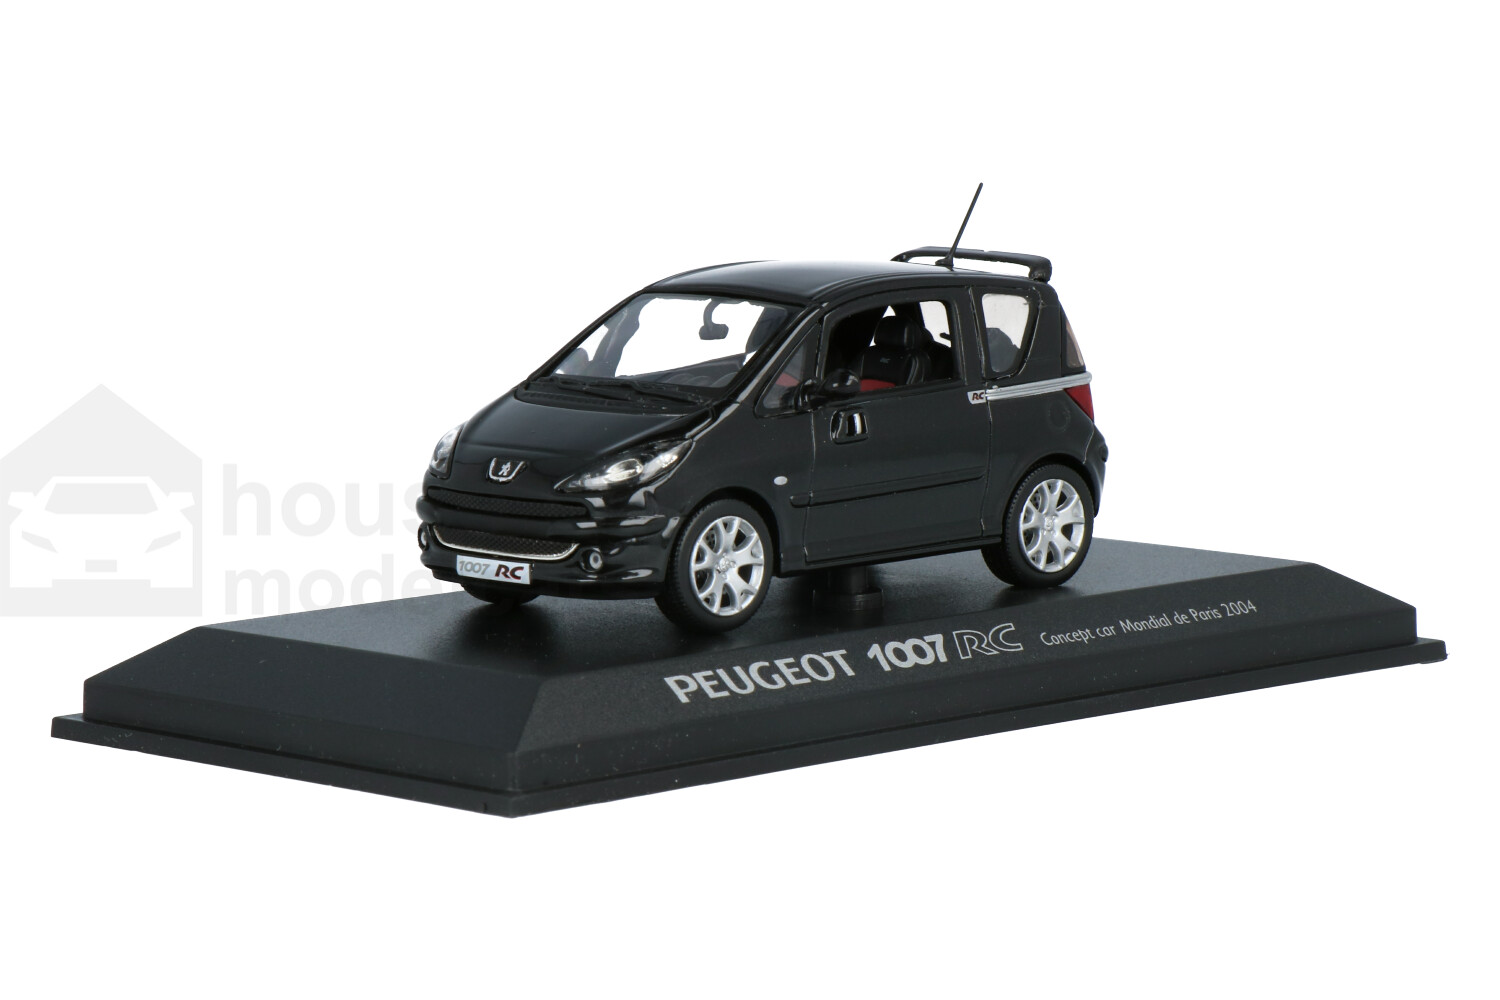 Peugeot-1007-RC-471079_13153551094710797-NorevPeugeot-1007-RC-471079_Houseofmodelcars_.jpg